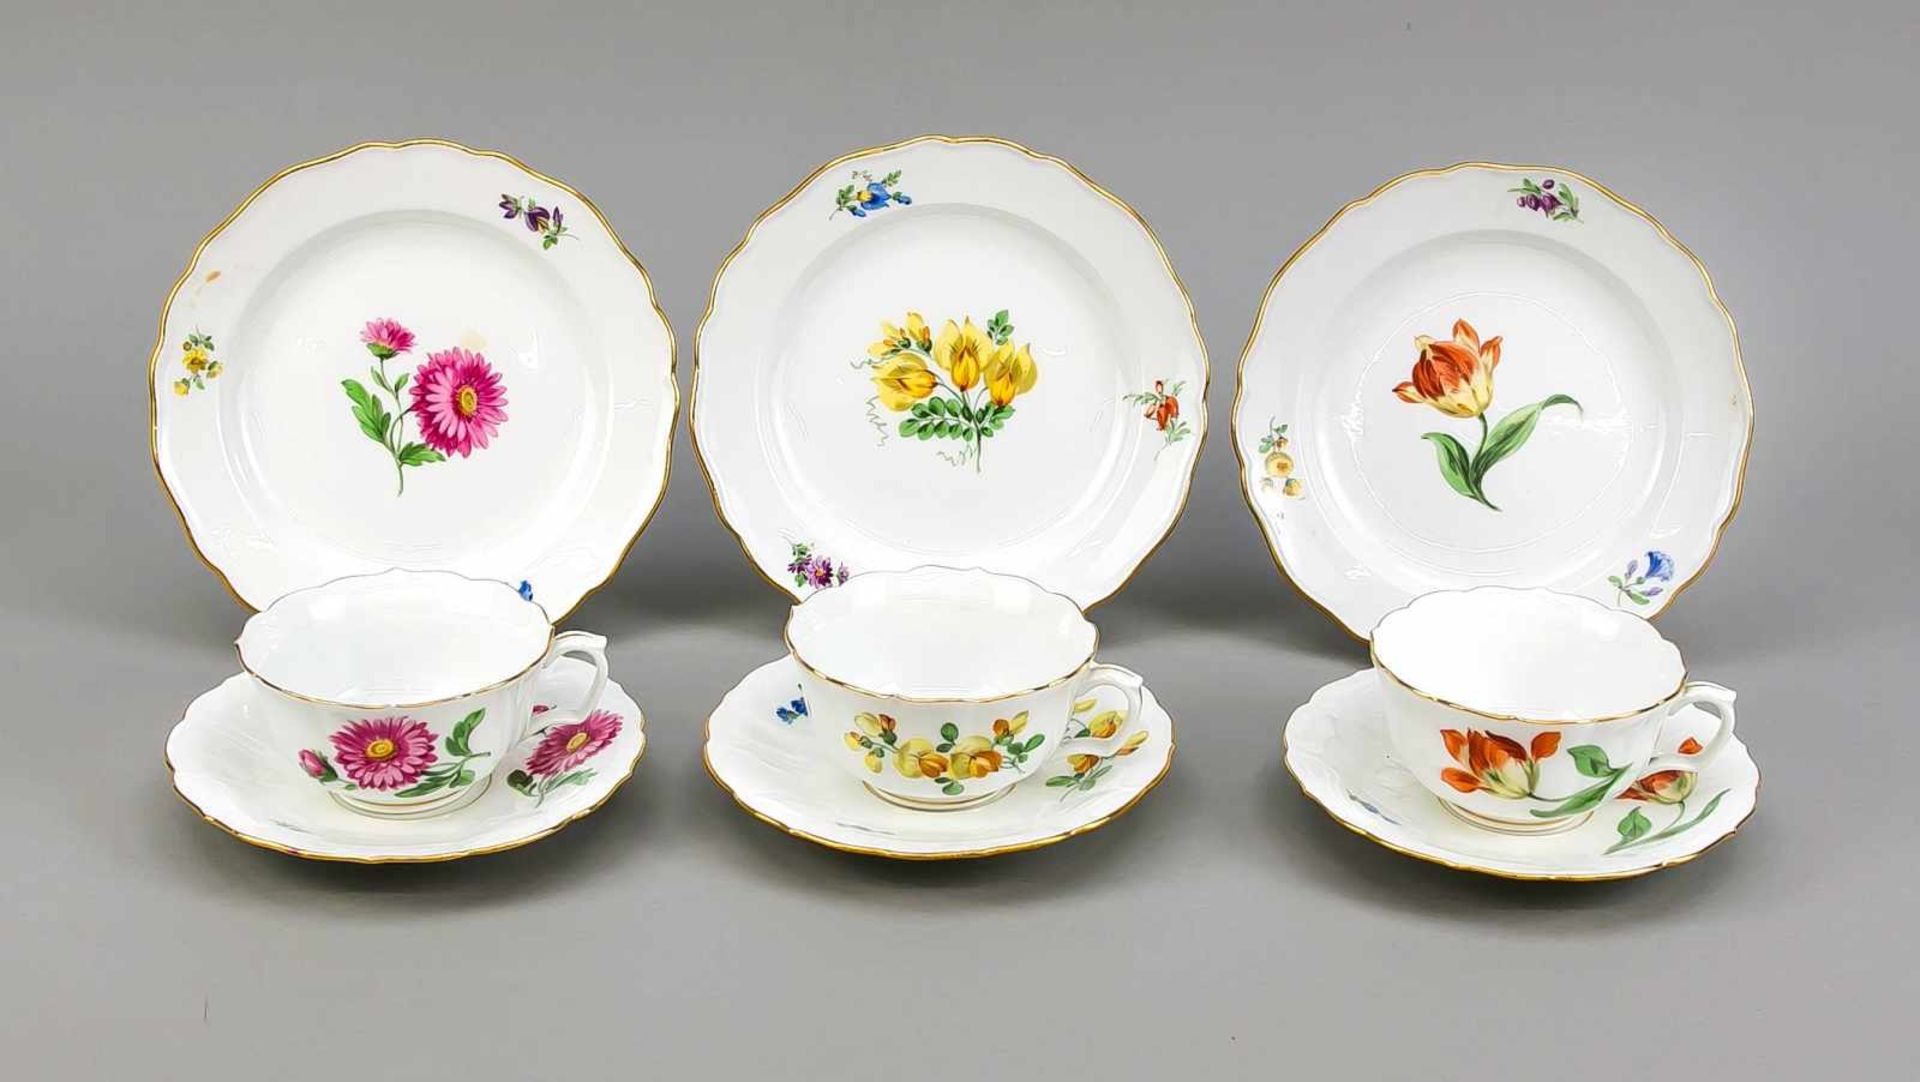 Three place settings, 9 pieces, Meissen, mark 1924-34, 2nd quality, shape new cutout,polychrome